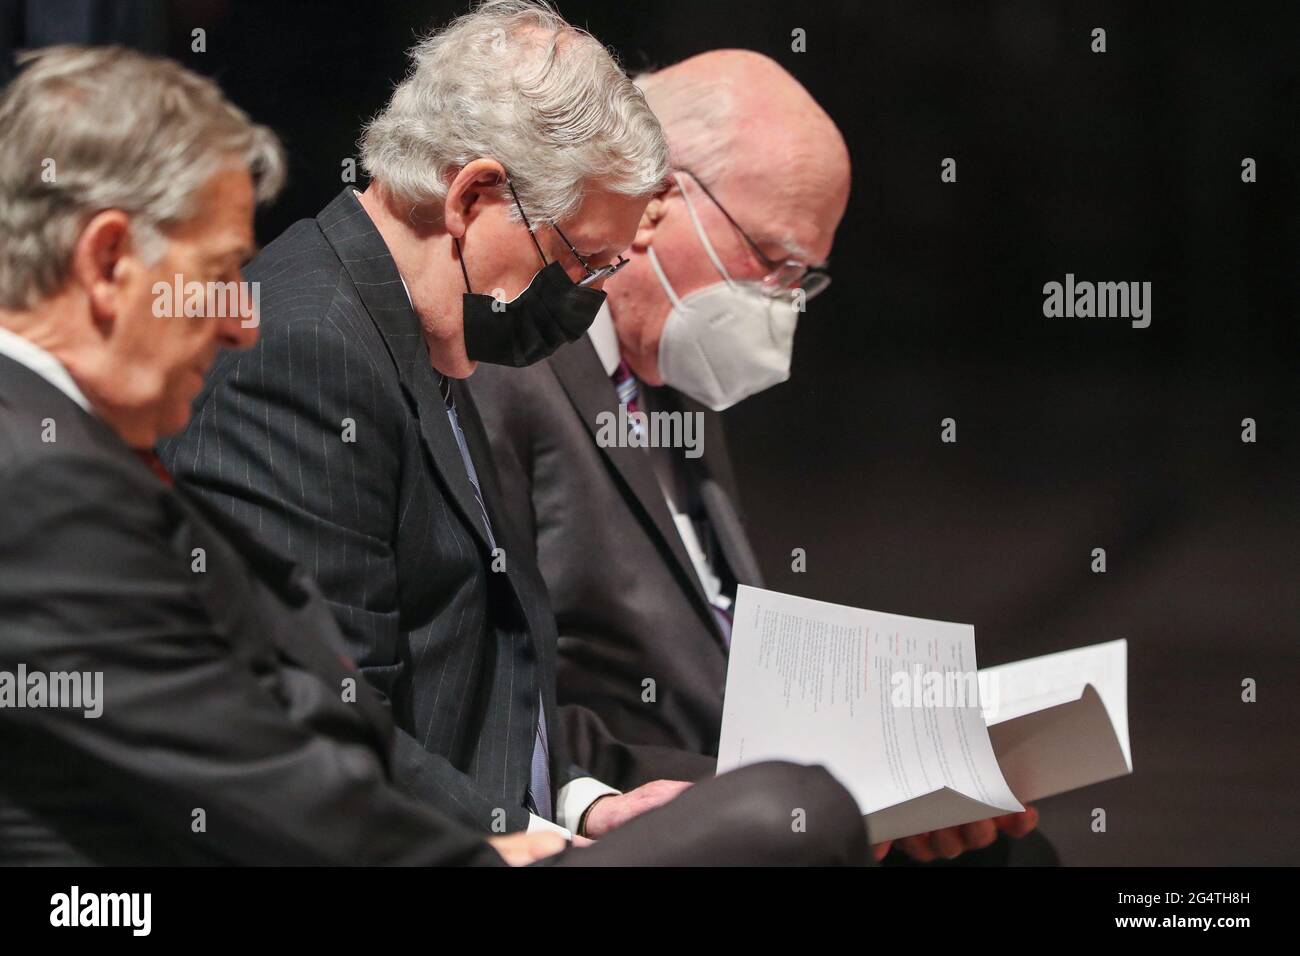 Senate Minority Leader Mitch McConnell (R-KY) and Senator Patrick Leahy (D-VT) read before the funeral ceremony of Senator John Warner at Washington National Cathedral on Wednesday, June 23, 2021 in Washington, DC. Photo by Oliver Contreras/Pool/ABACAPRESS.COM Stock Photo